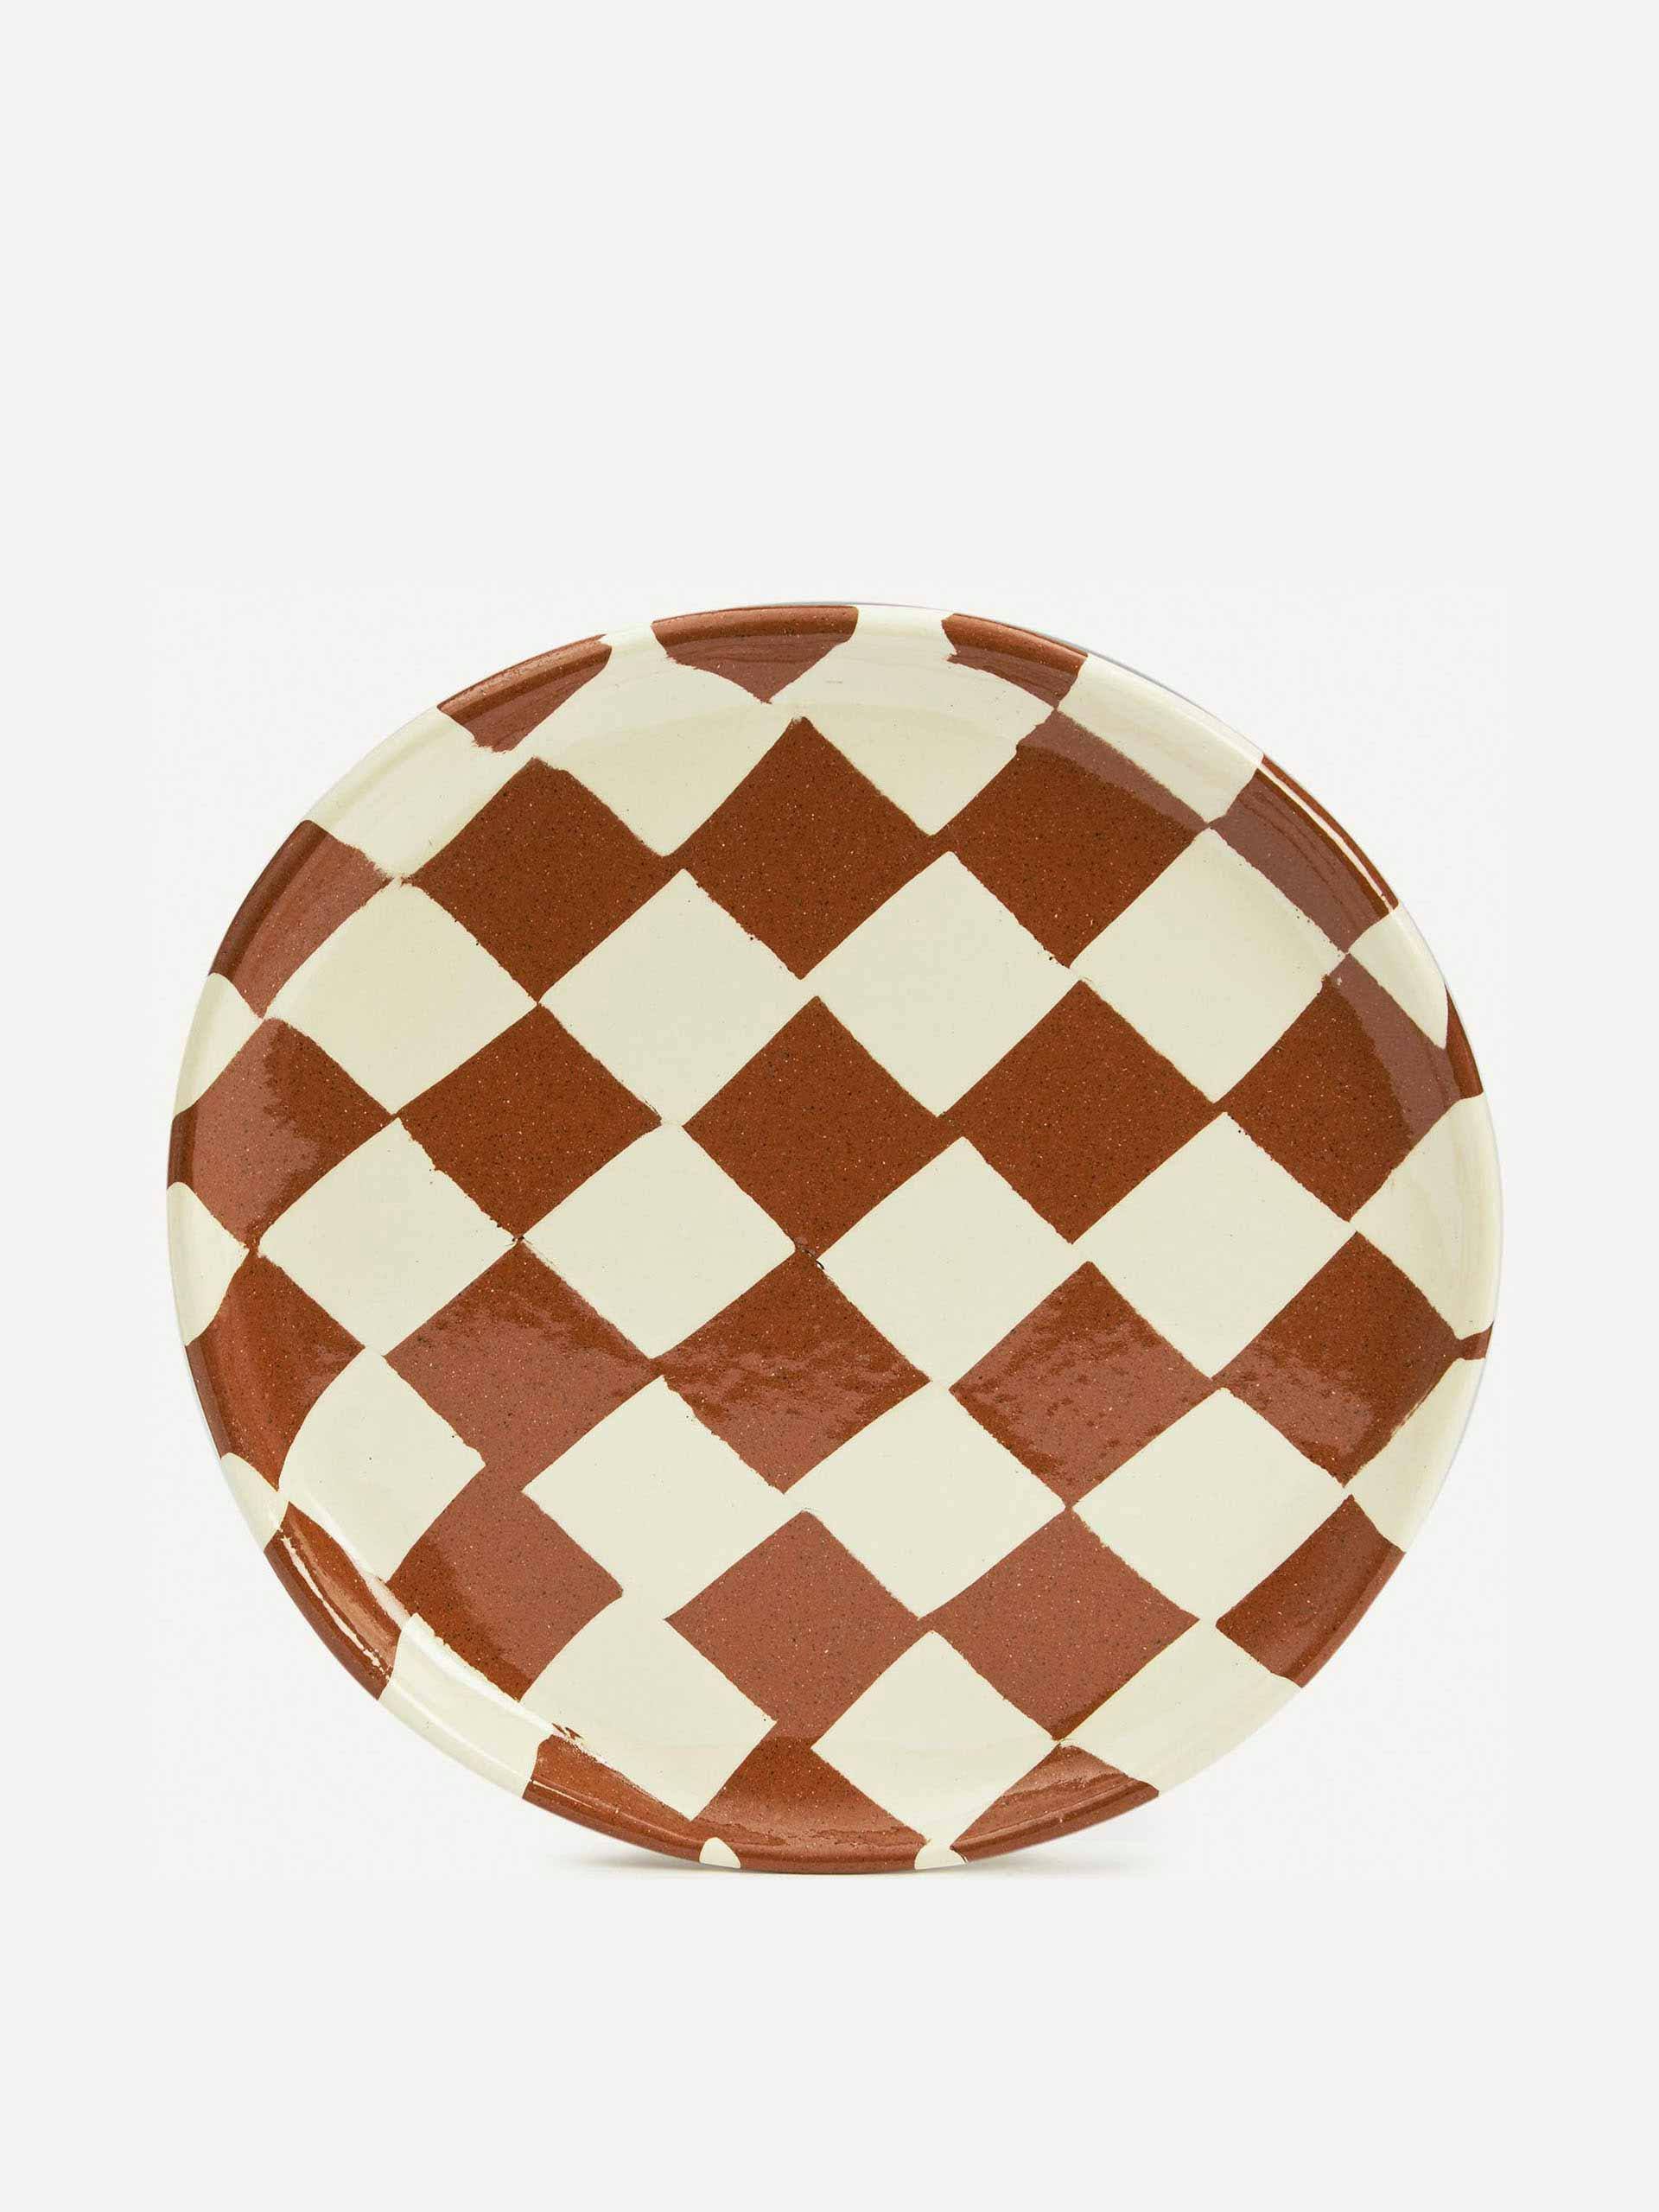 Brown and white checkerboard side plate